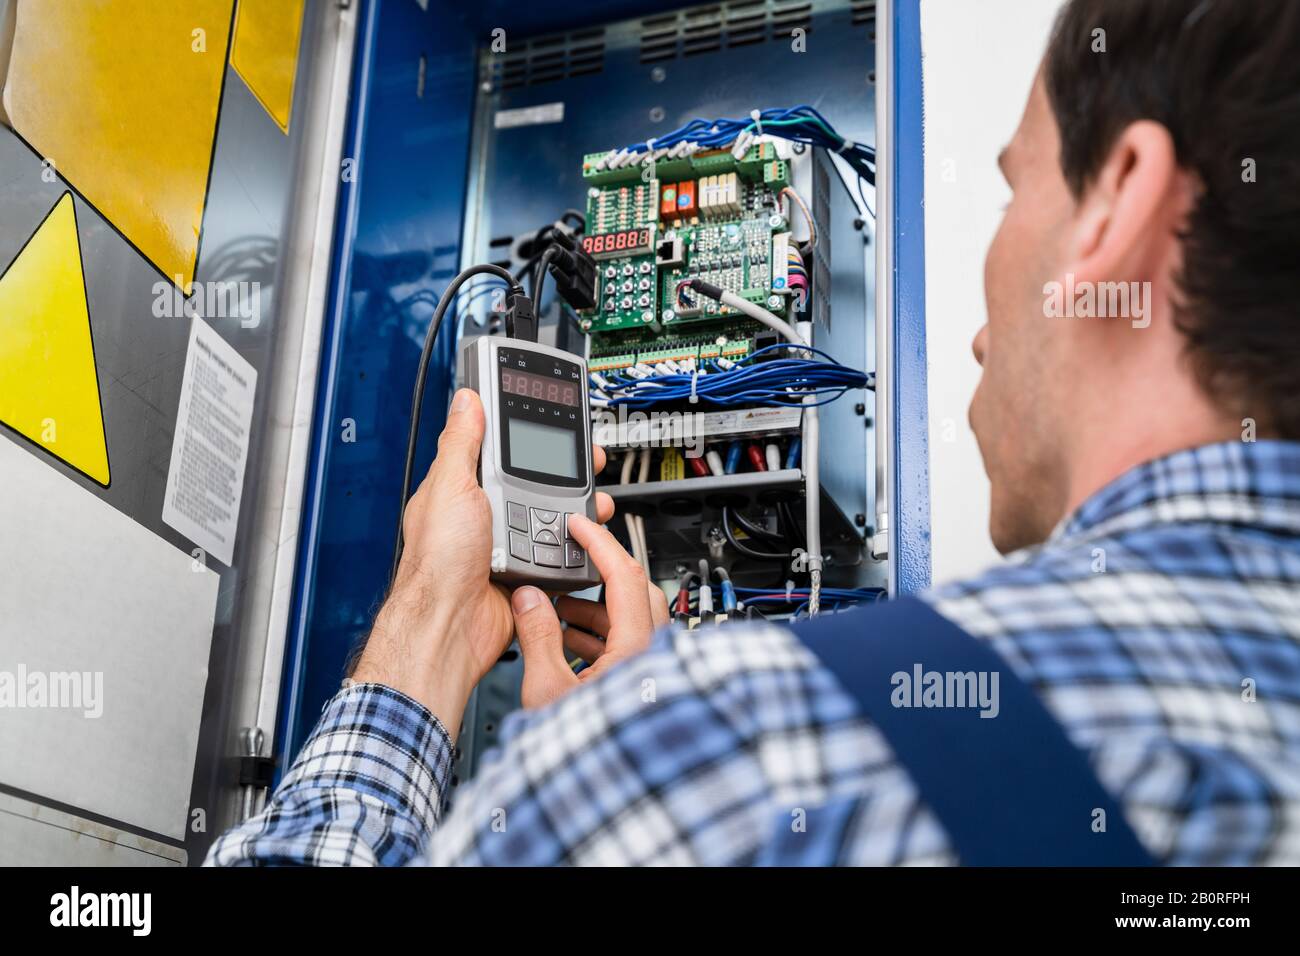 Photo Of Young Male Technician Examining Fusebox Stock Photo